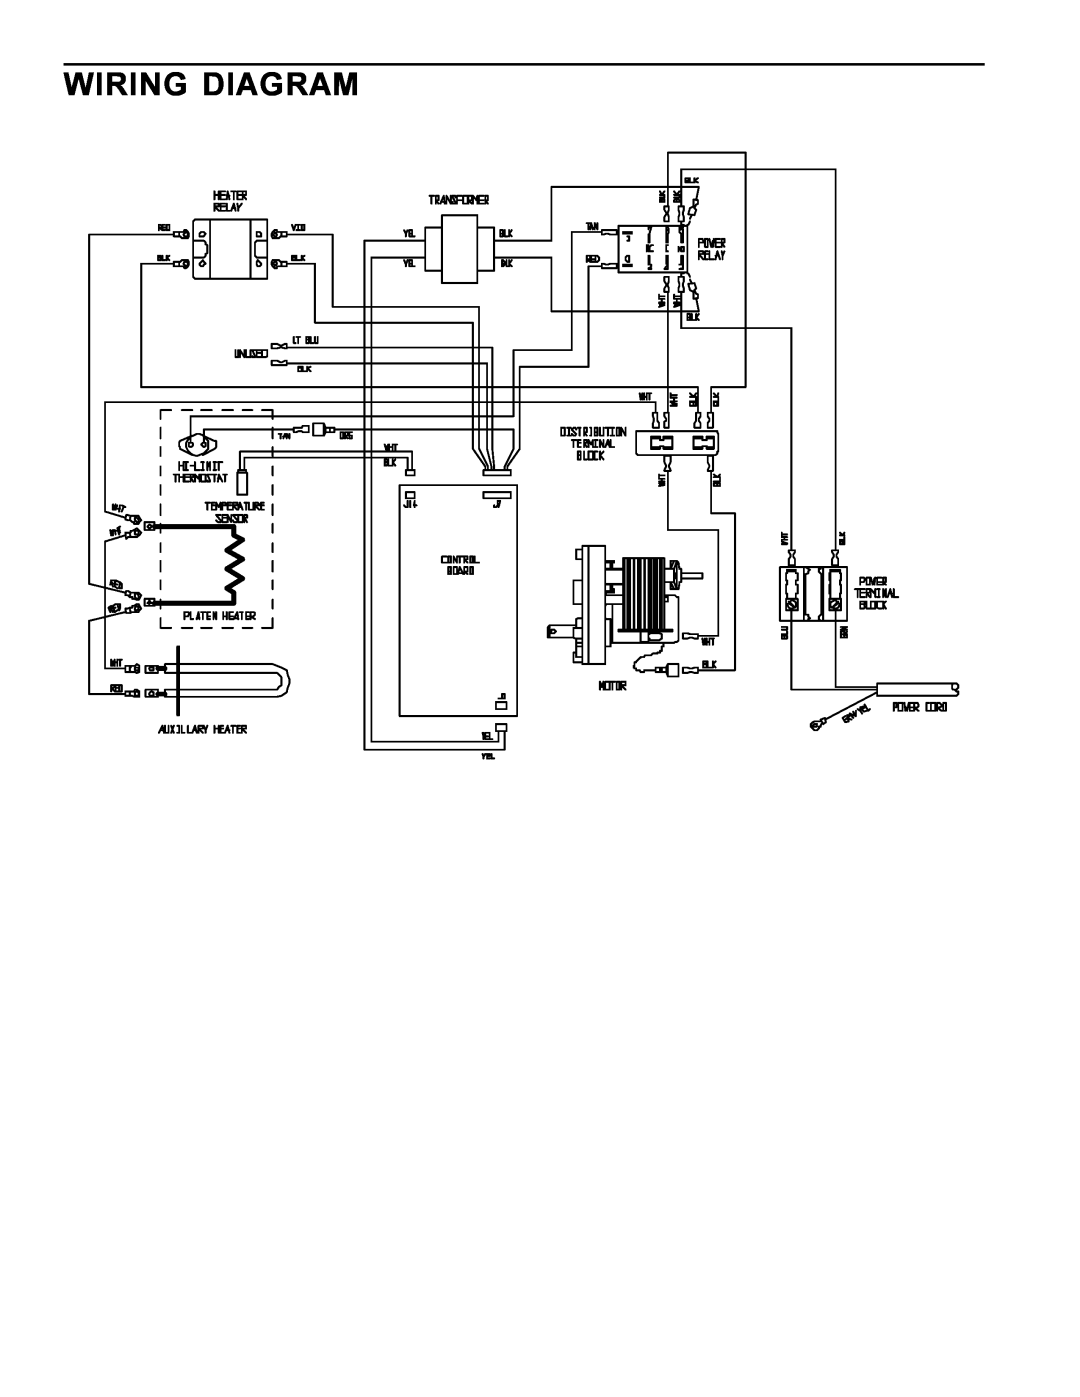 Prince Castle TX Series operating instructions Wiring Diagram 